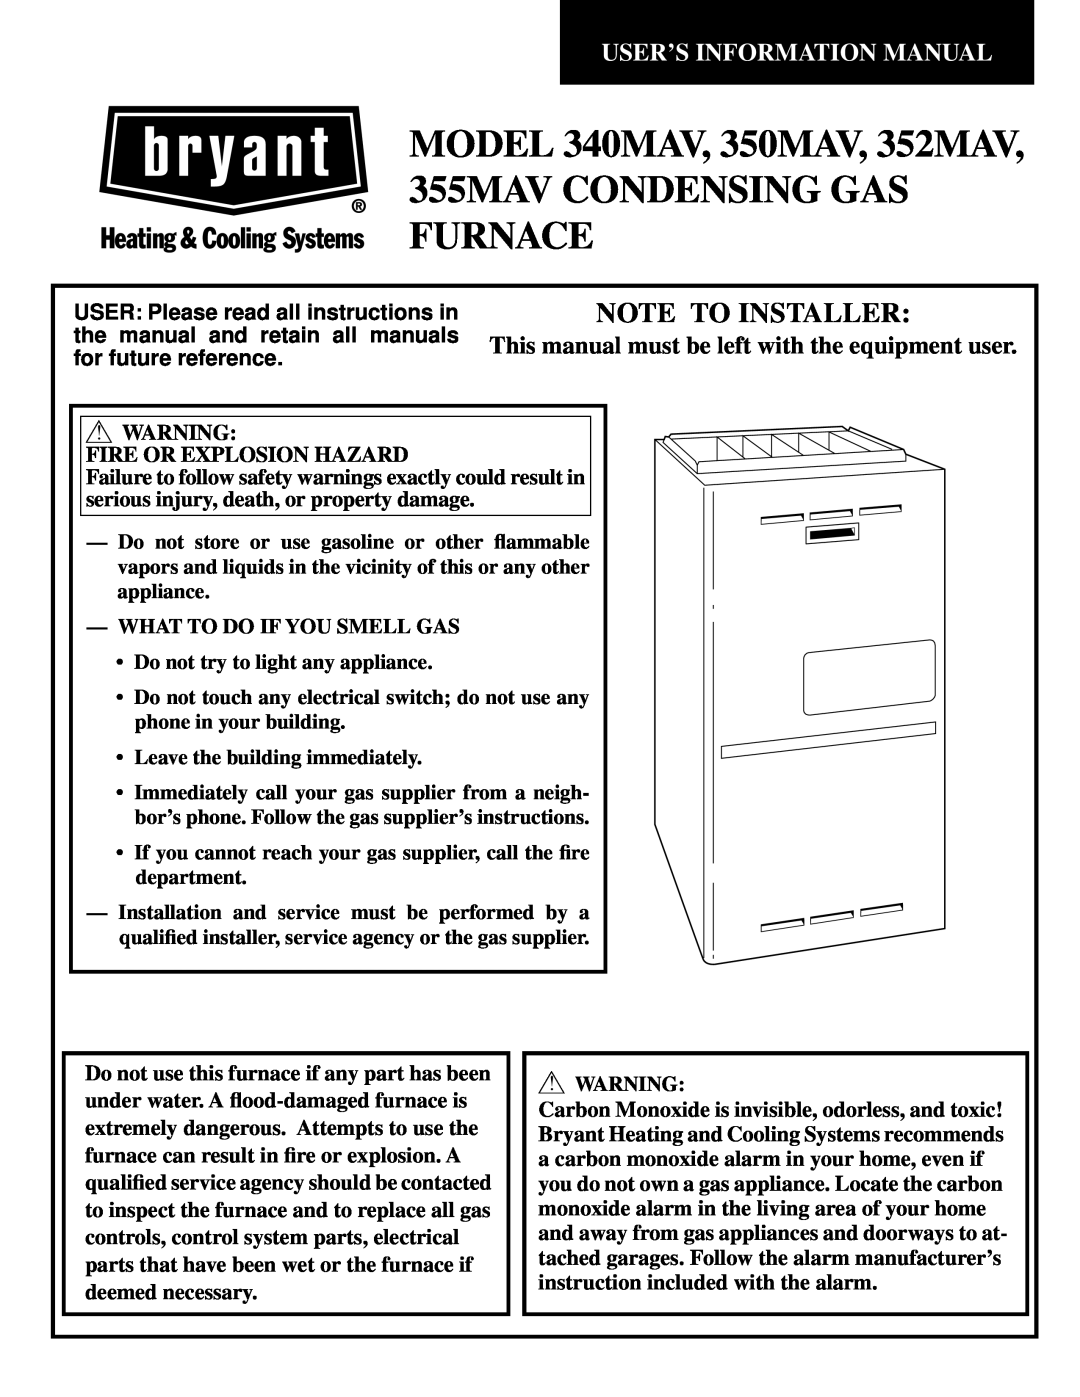 Bryant instruction manual Safety Considerations, 340MAV Series J, installation, start-up and operating instructions 